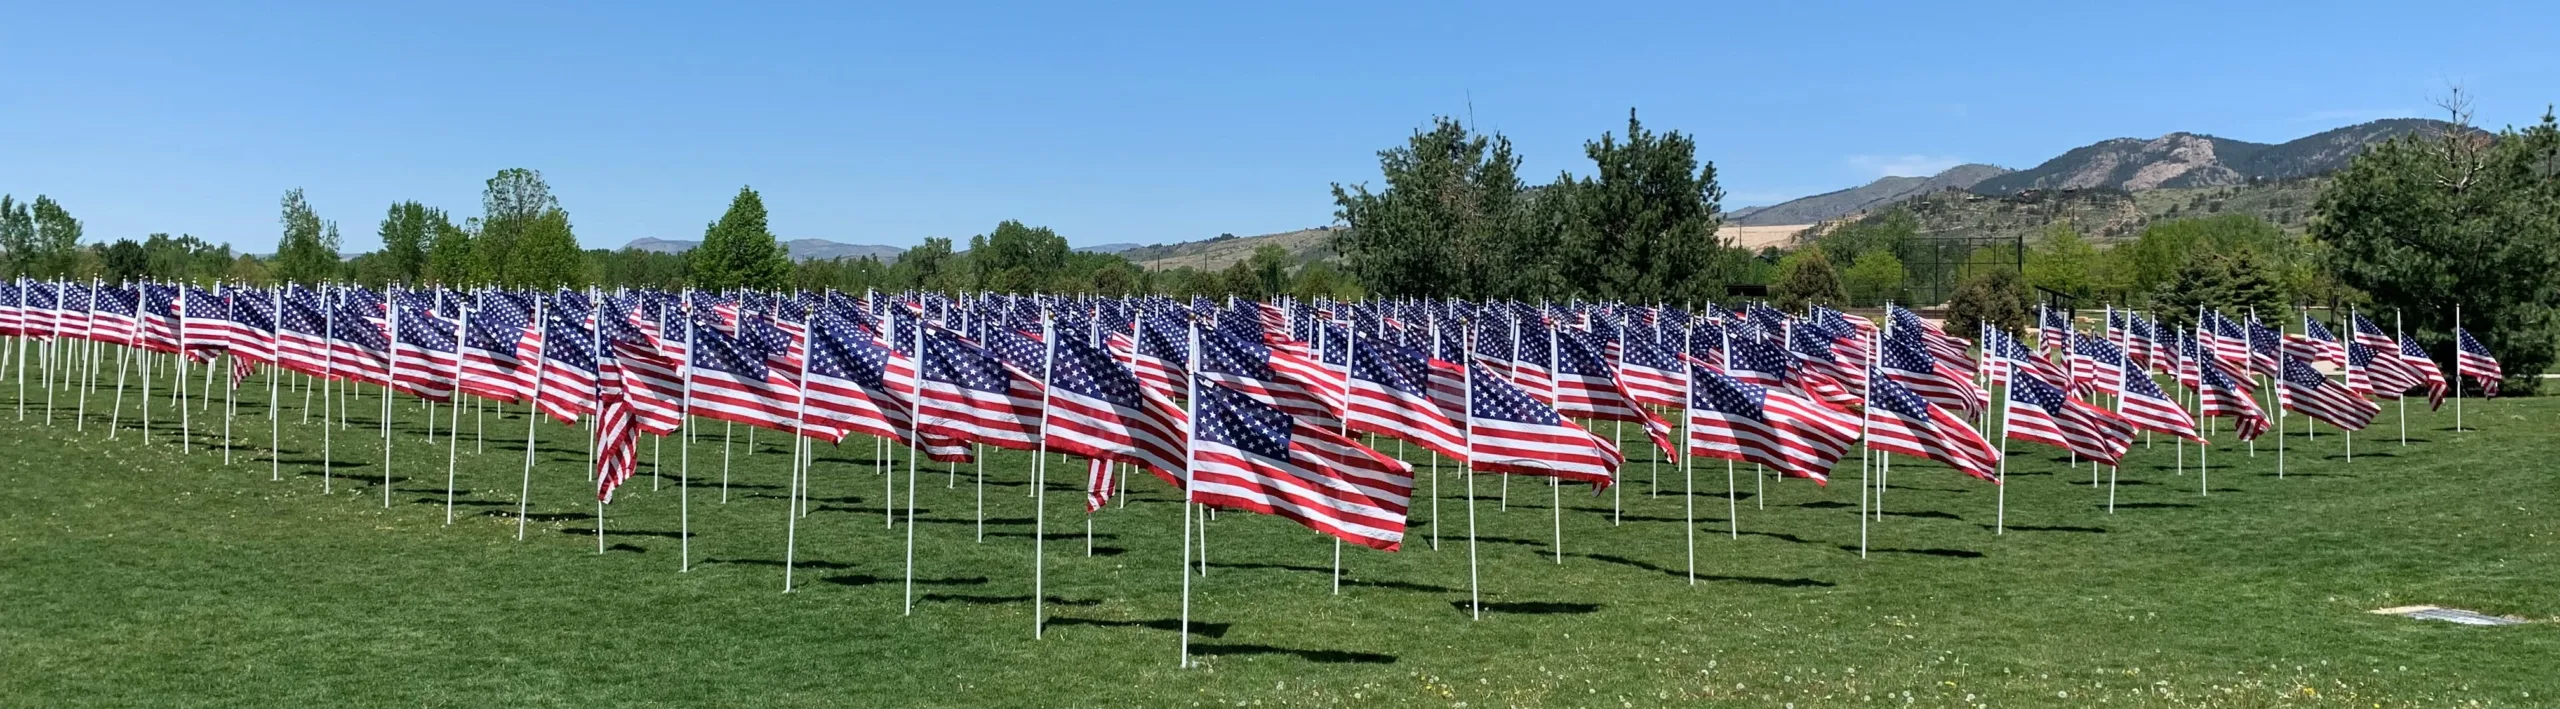 Field filled with American flags